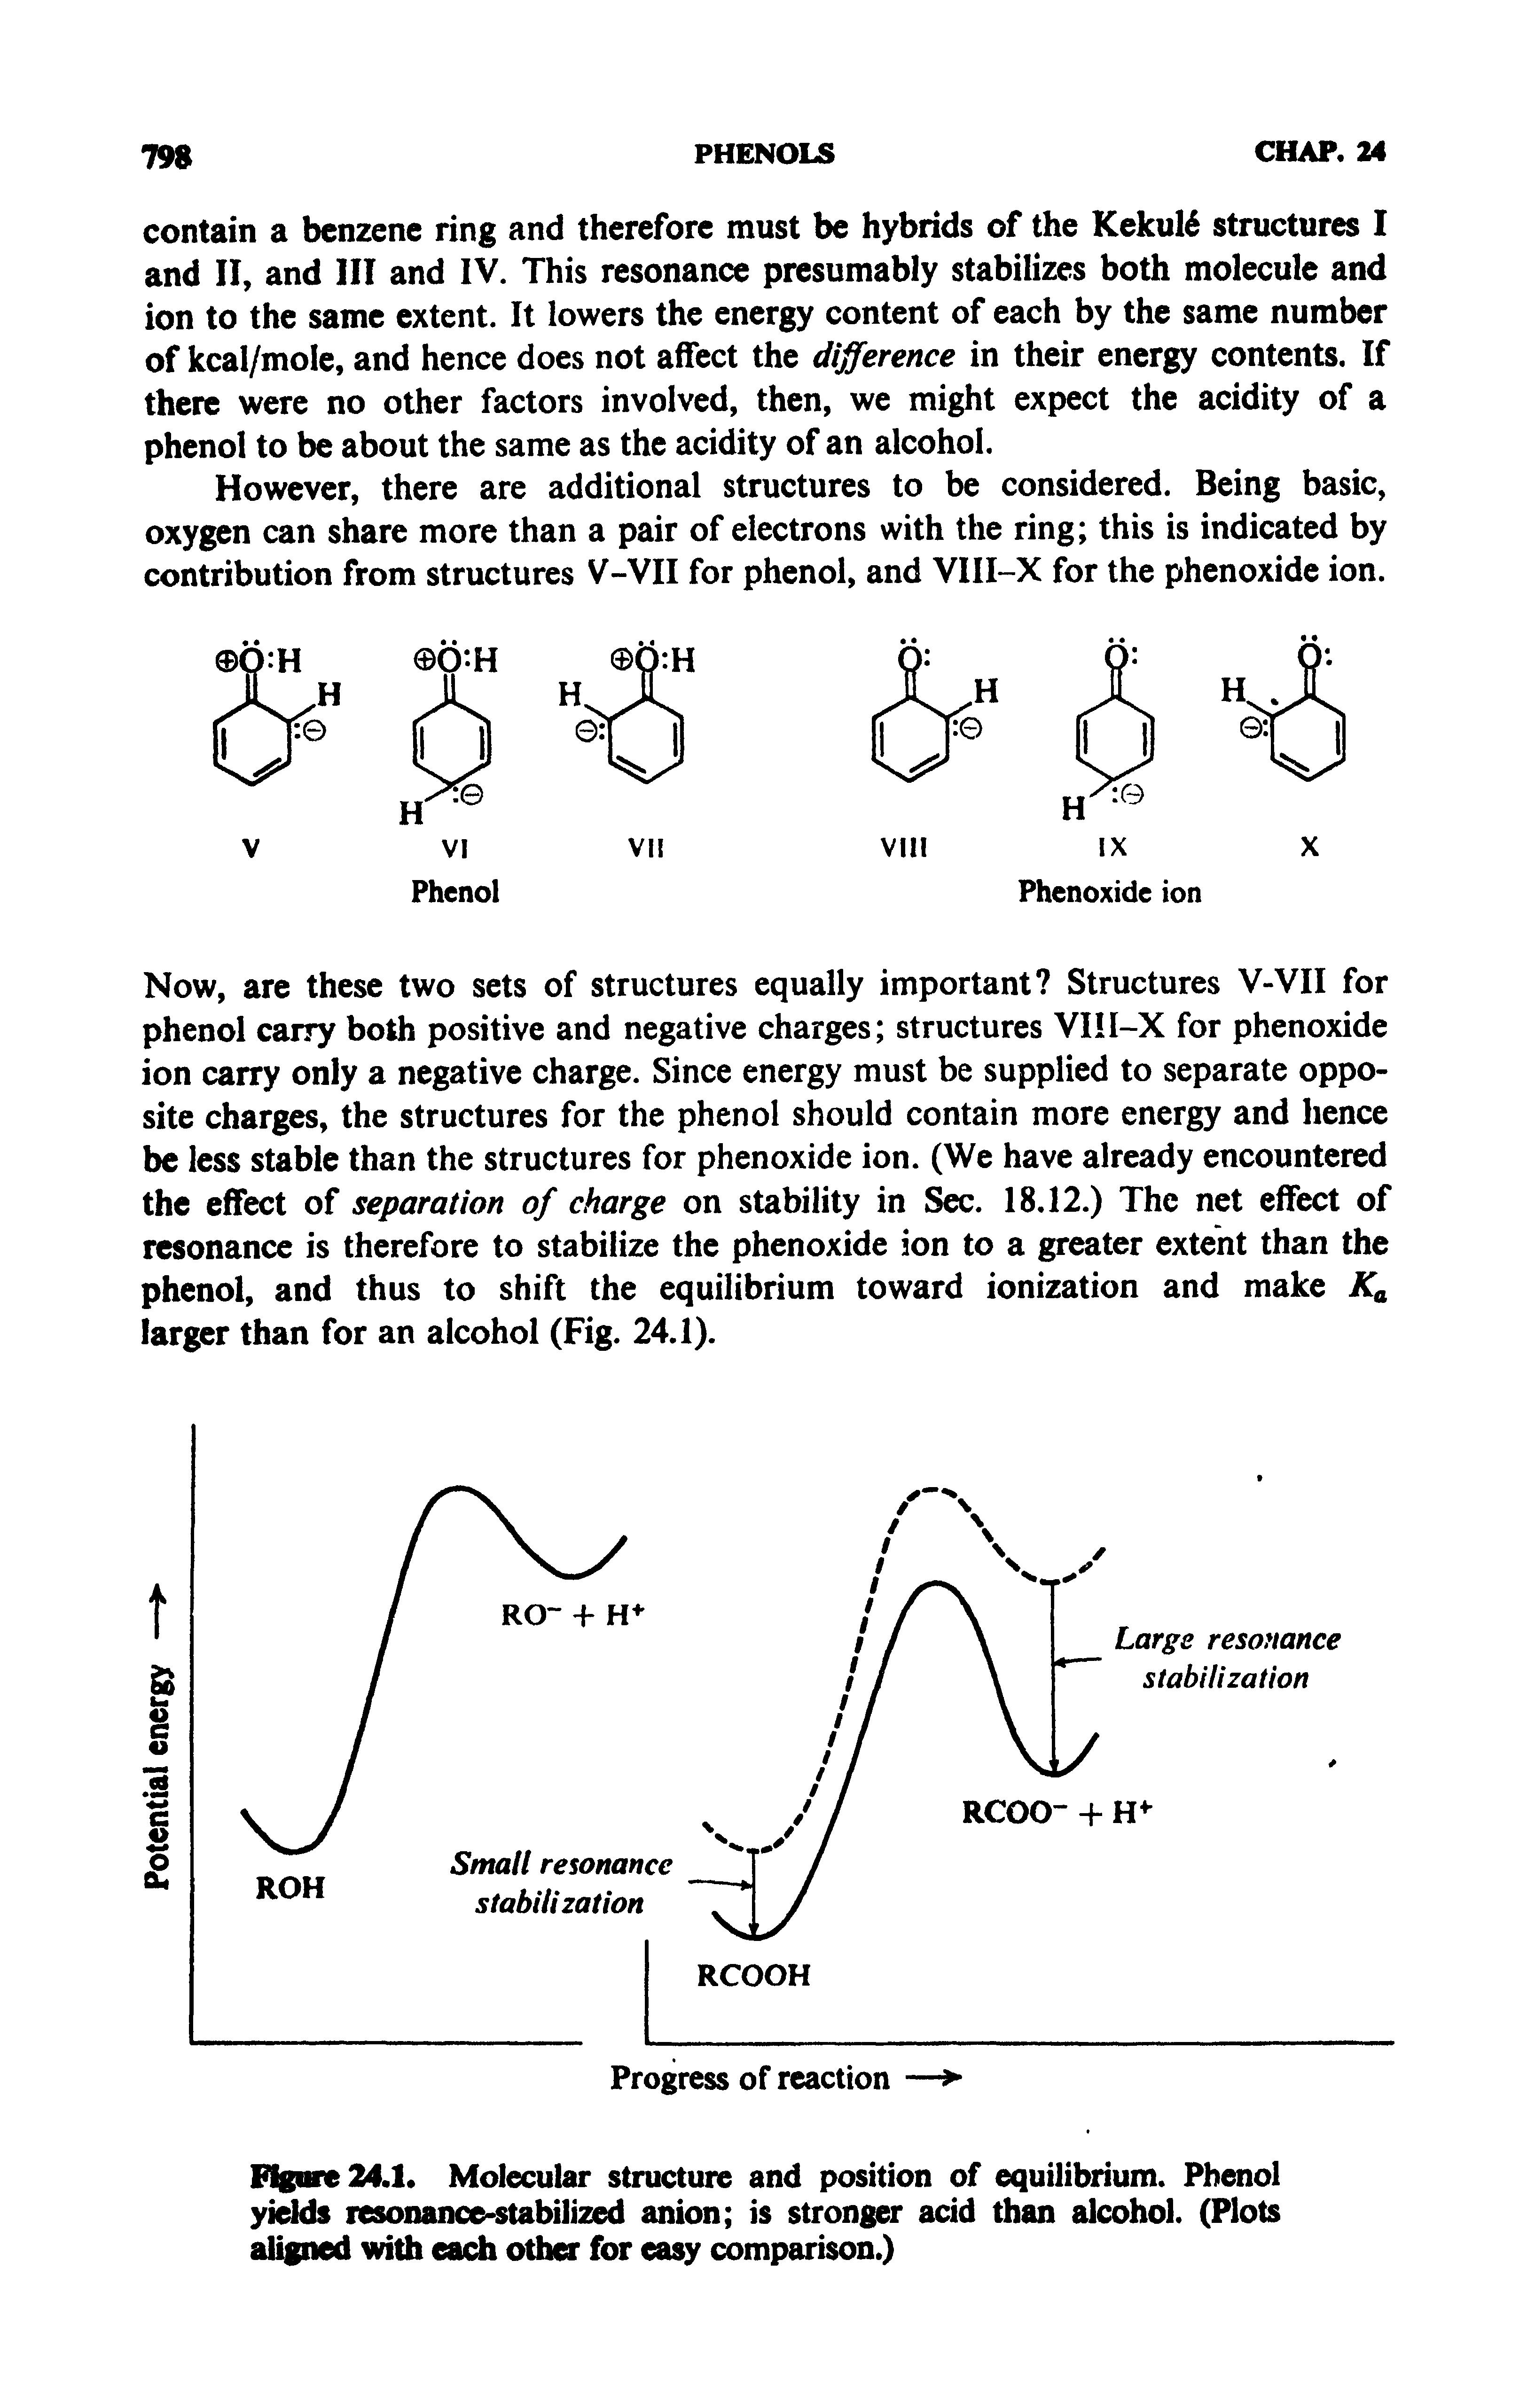 Figure 24.1. Molecular structure and position of equilibrium. Phenol yields resonance-stabilized anion is stronger acid than alcohol. (Plots aligned with each other for easy comparison.)...